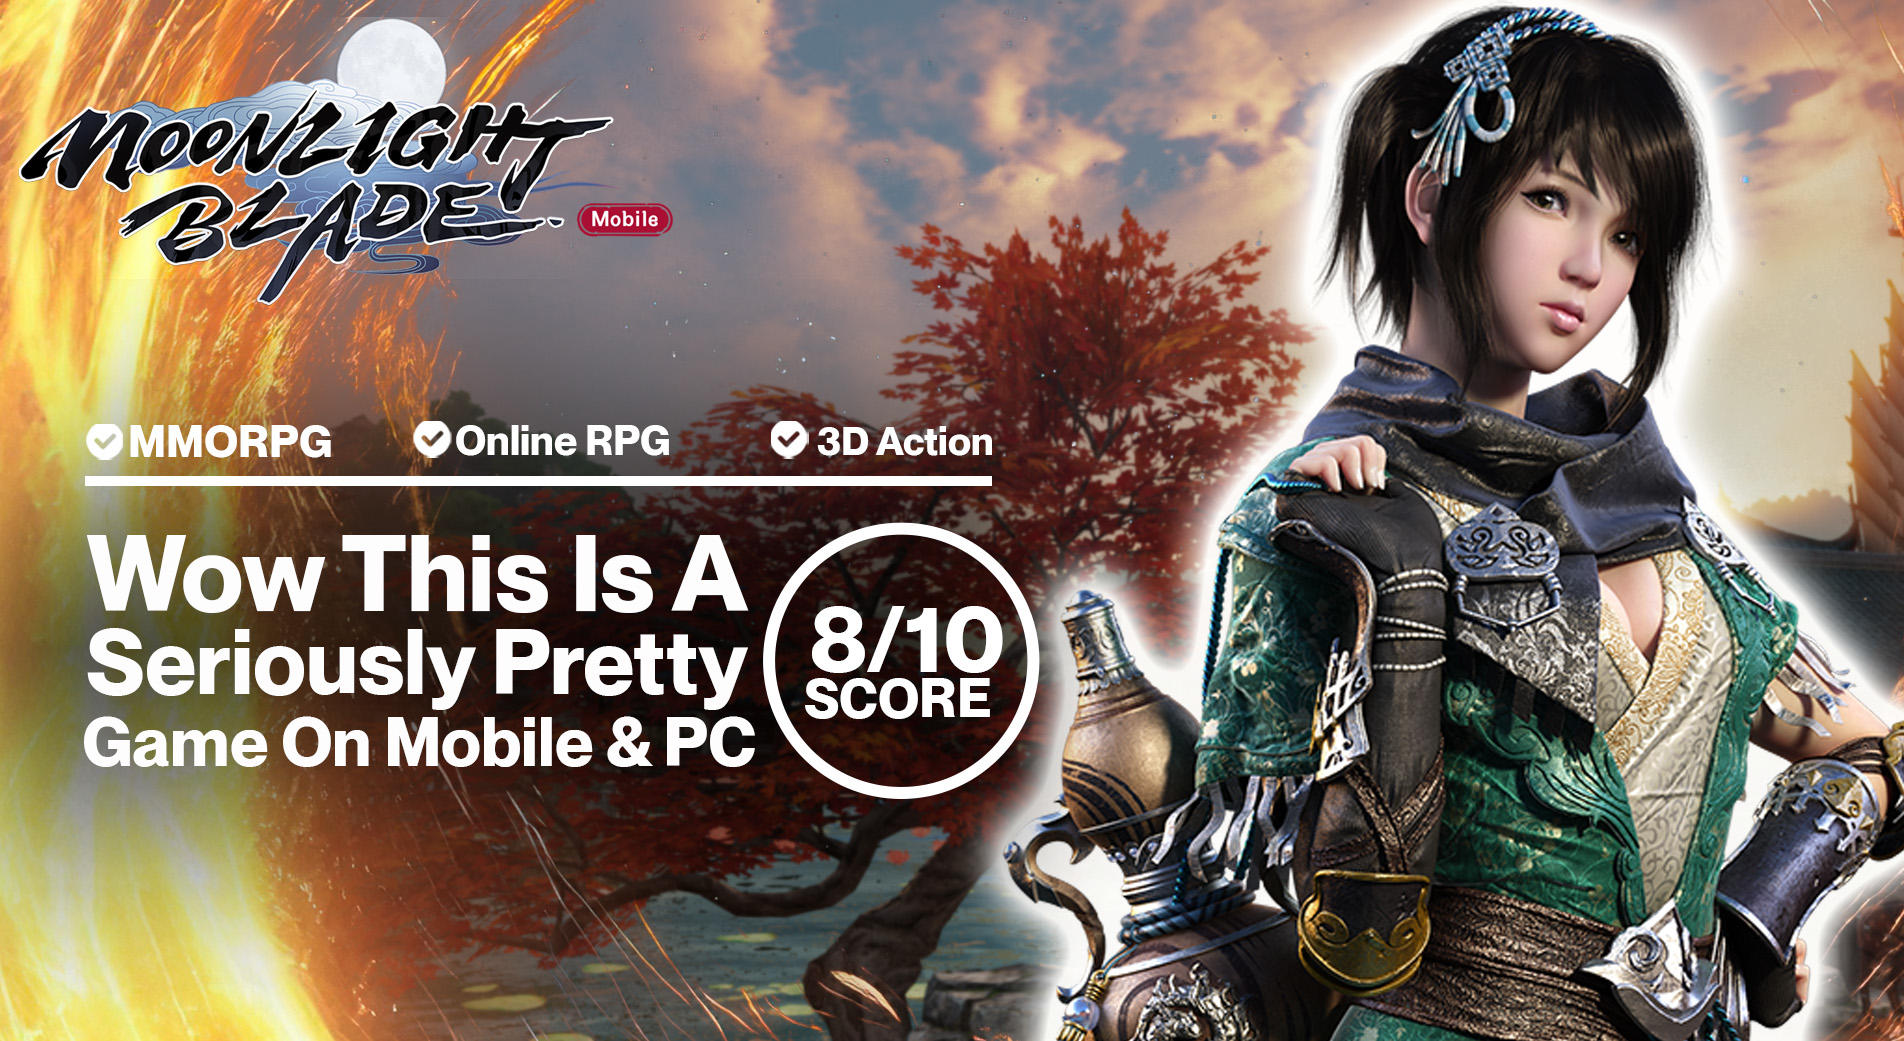 Moonlight Blade Mobile [Open Beta] - A GORGEOUS Wuxia Mobile MMORPG Also on PC